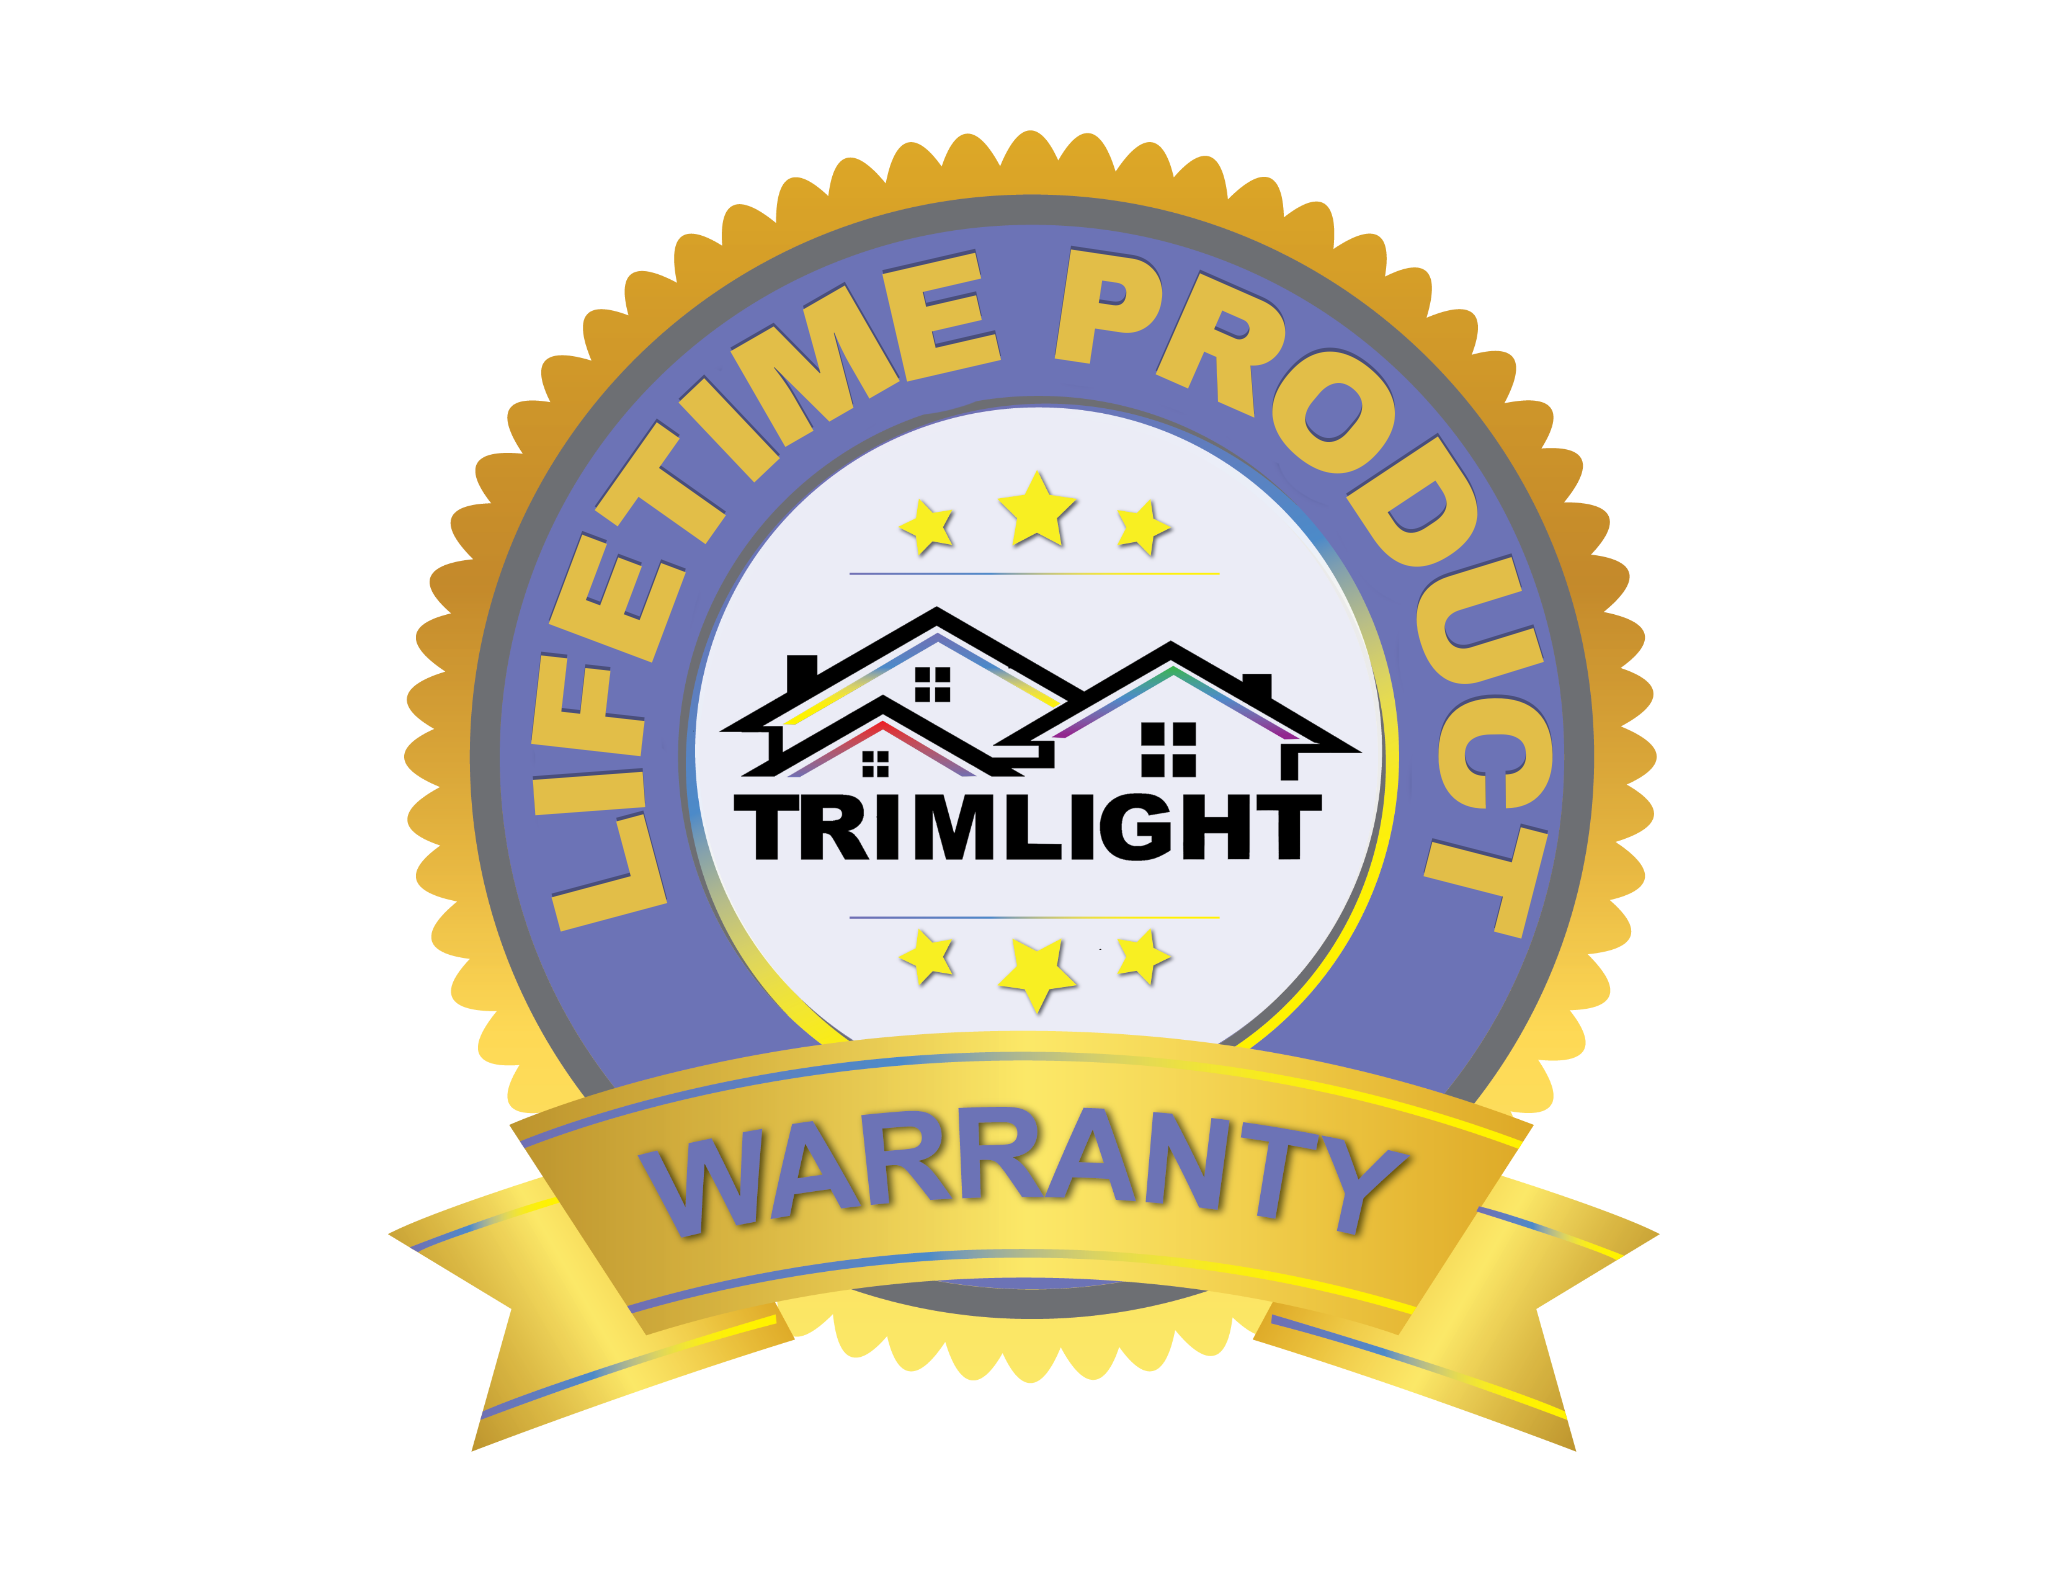 Lifetime Product Warranty from Trimlight